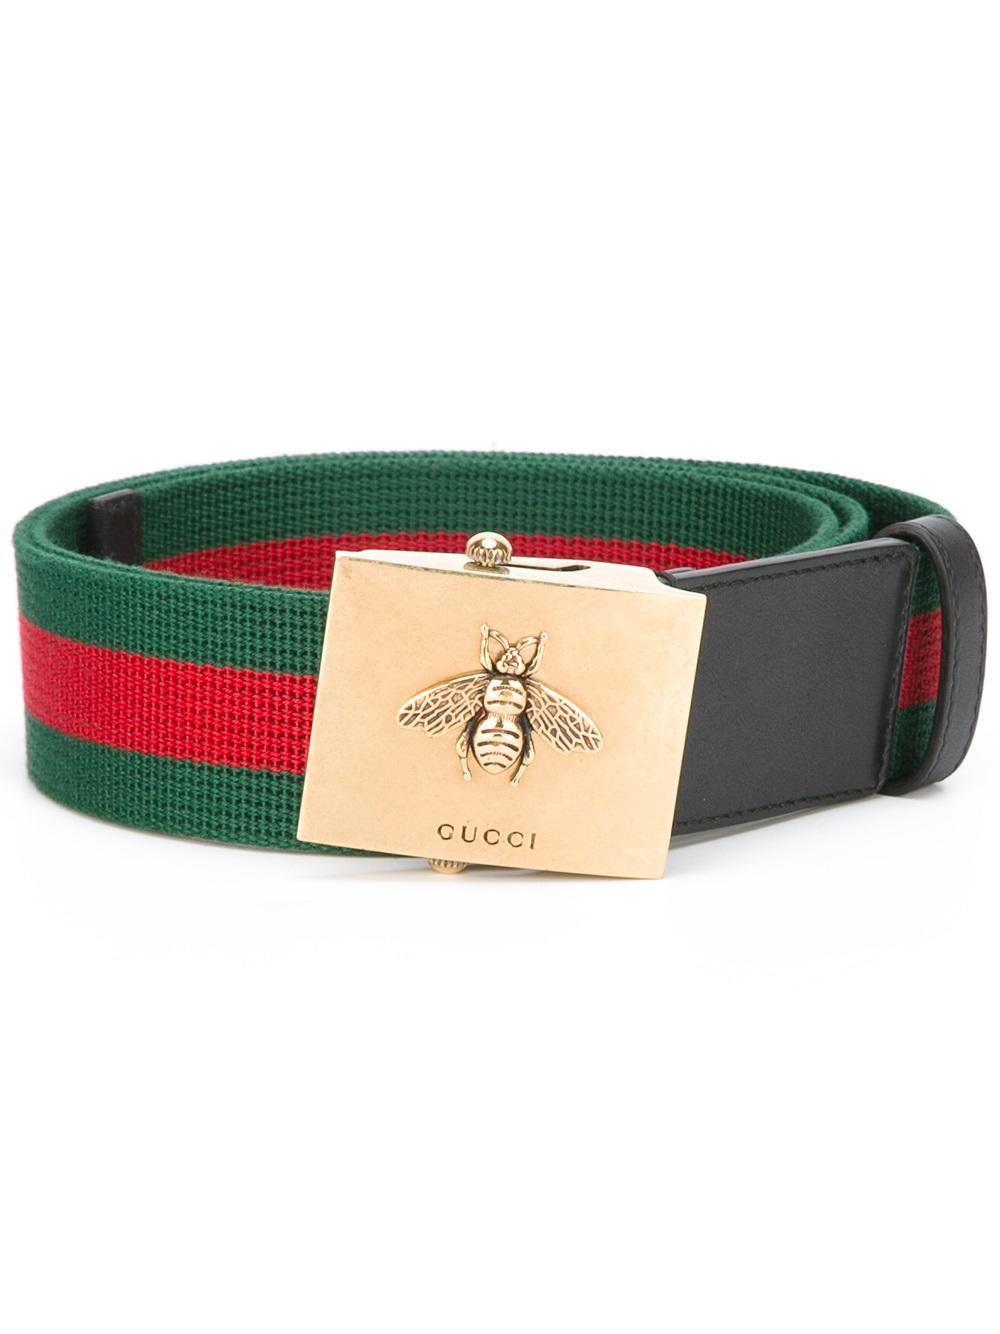 Gucci Canvas Web Belt in Green for Men | Lyst